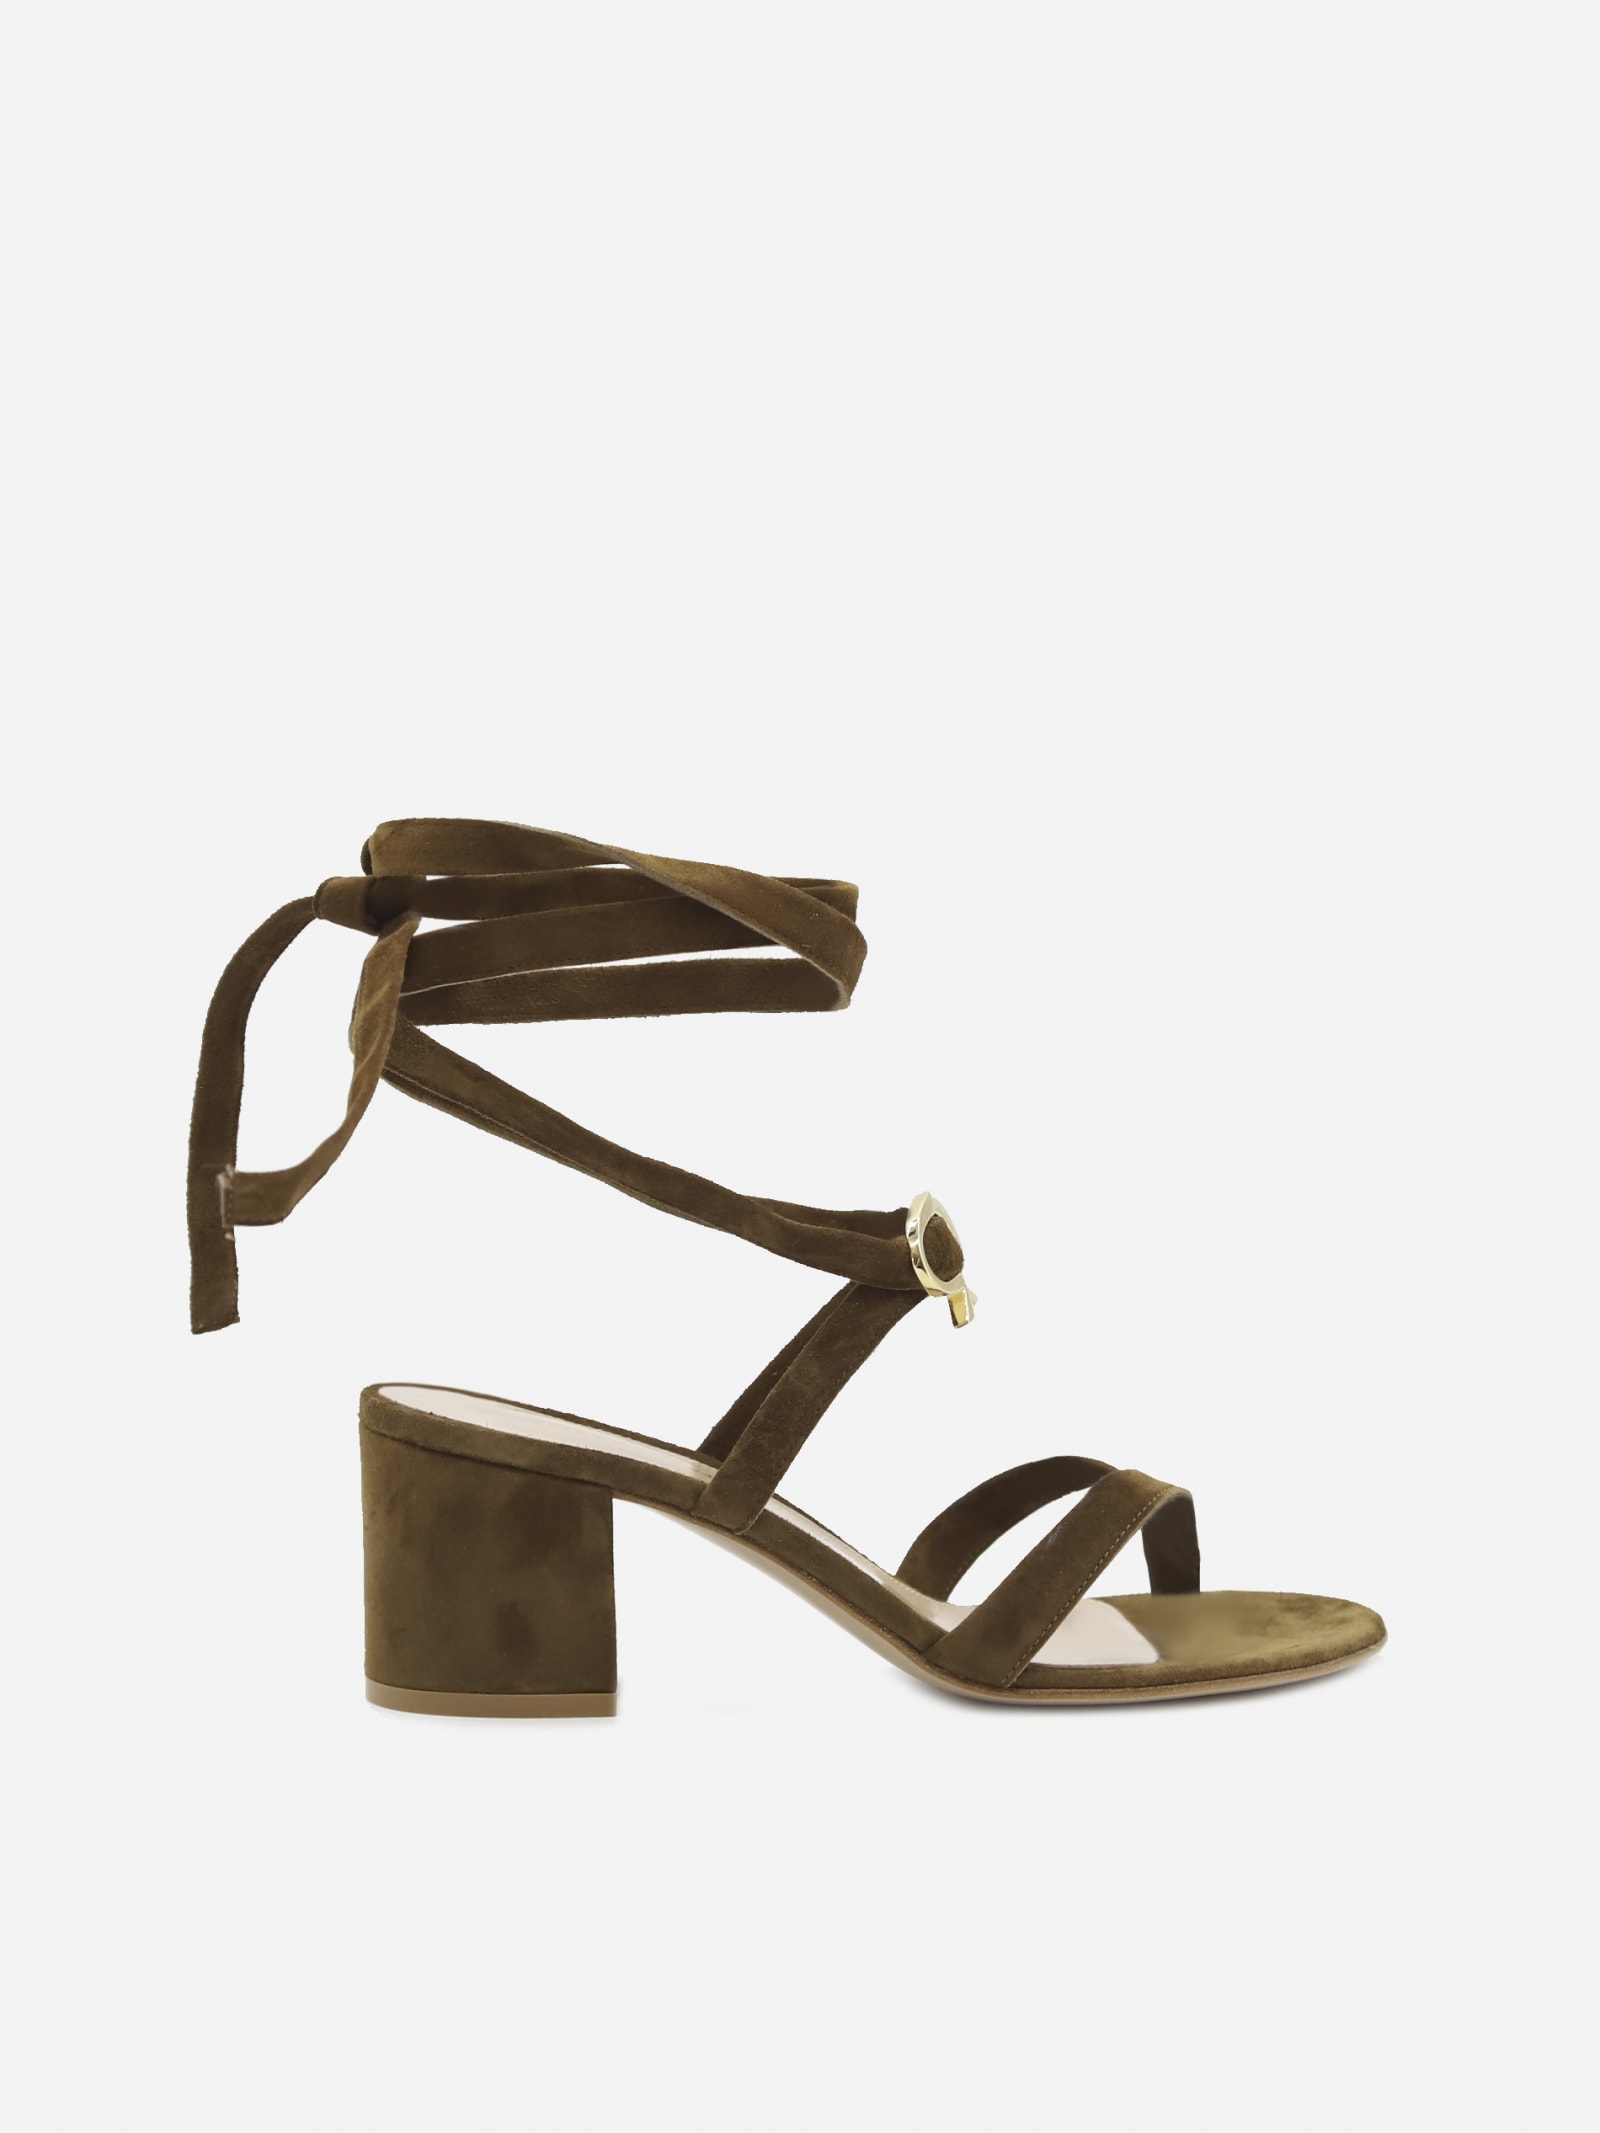 Gianvito Rossi Texas Sandals Made Of Suede